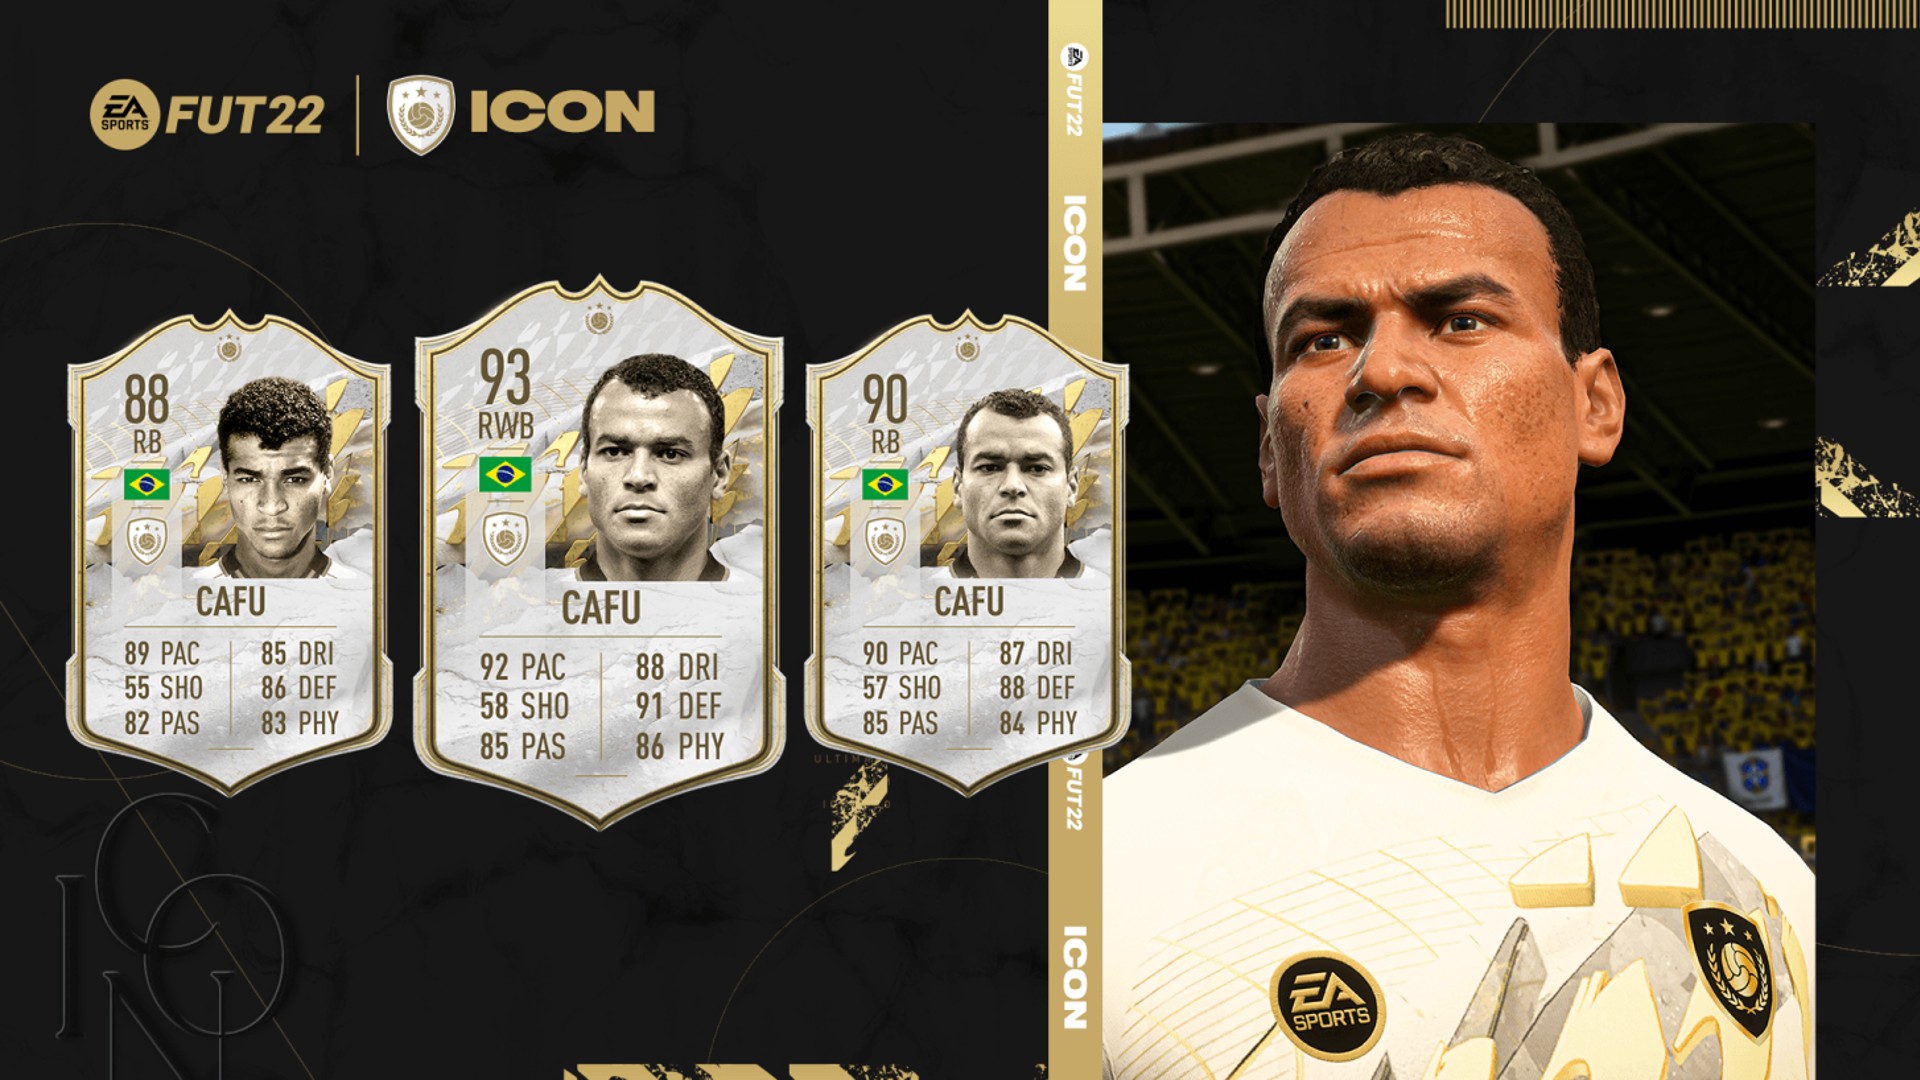 FIFA 22 Icons: A graphic showing the three Icon cards for Cafu in FIFA 22